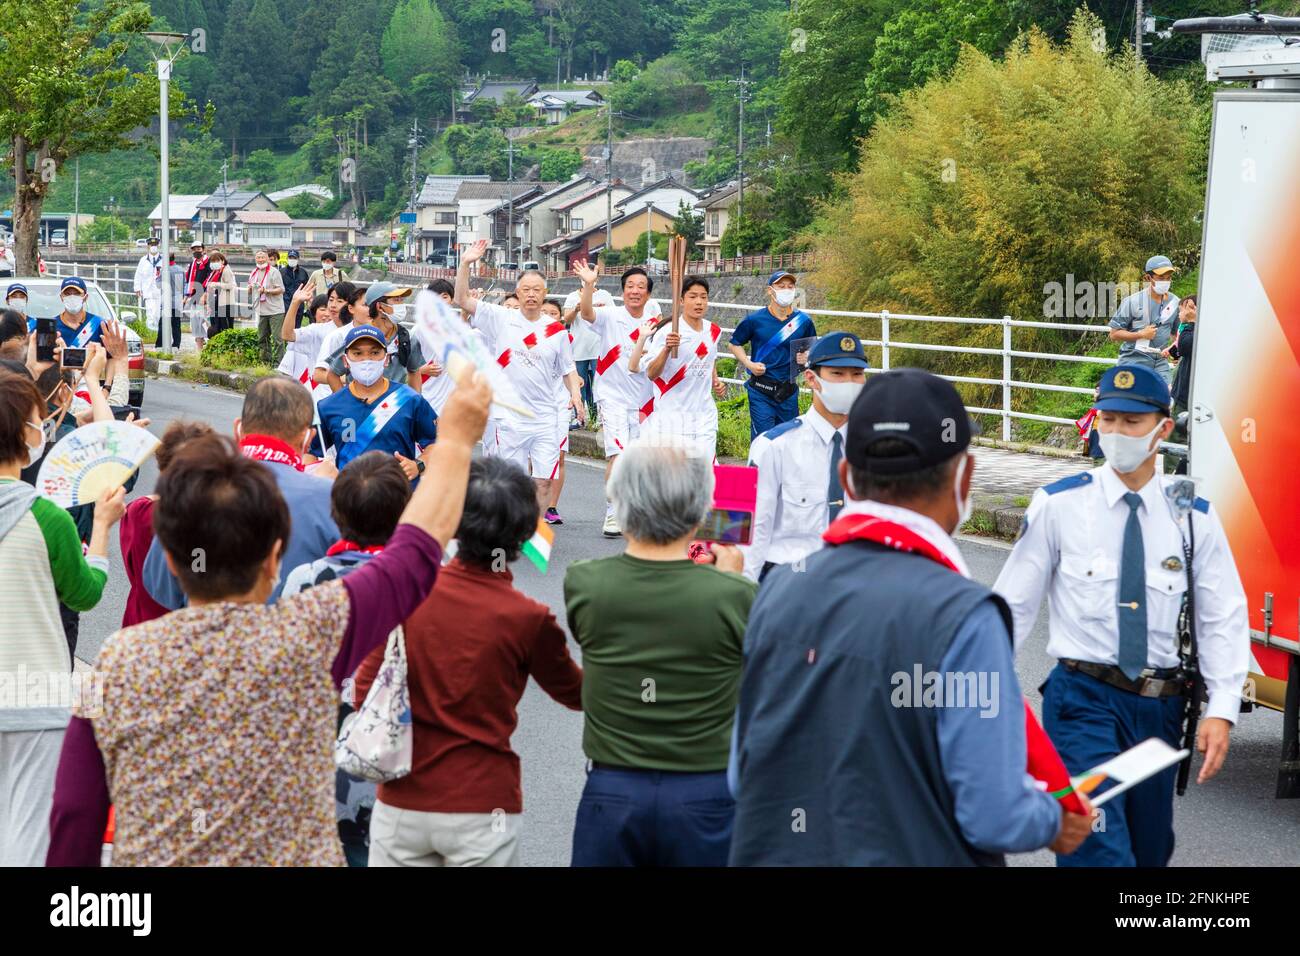 Local torchbearers run during the Tokyo 2020 Olympic torch relay in Okuizumo Town, Shimane Prefecture, Japan on May 16, 2021. Credit: Ryoji Okamoto/AFLO/Alamy Live News Stock Photo